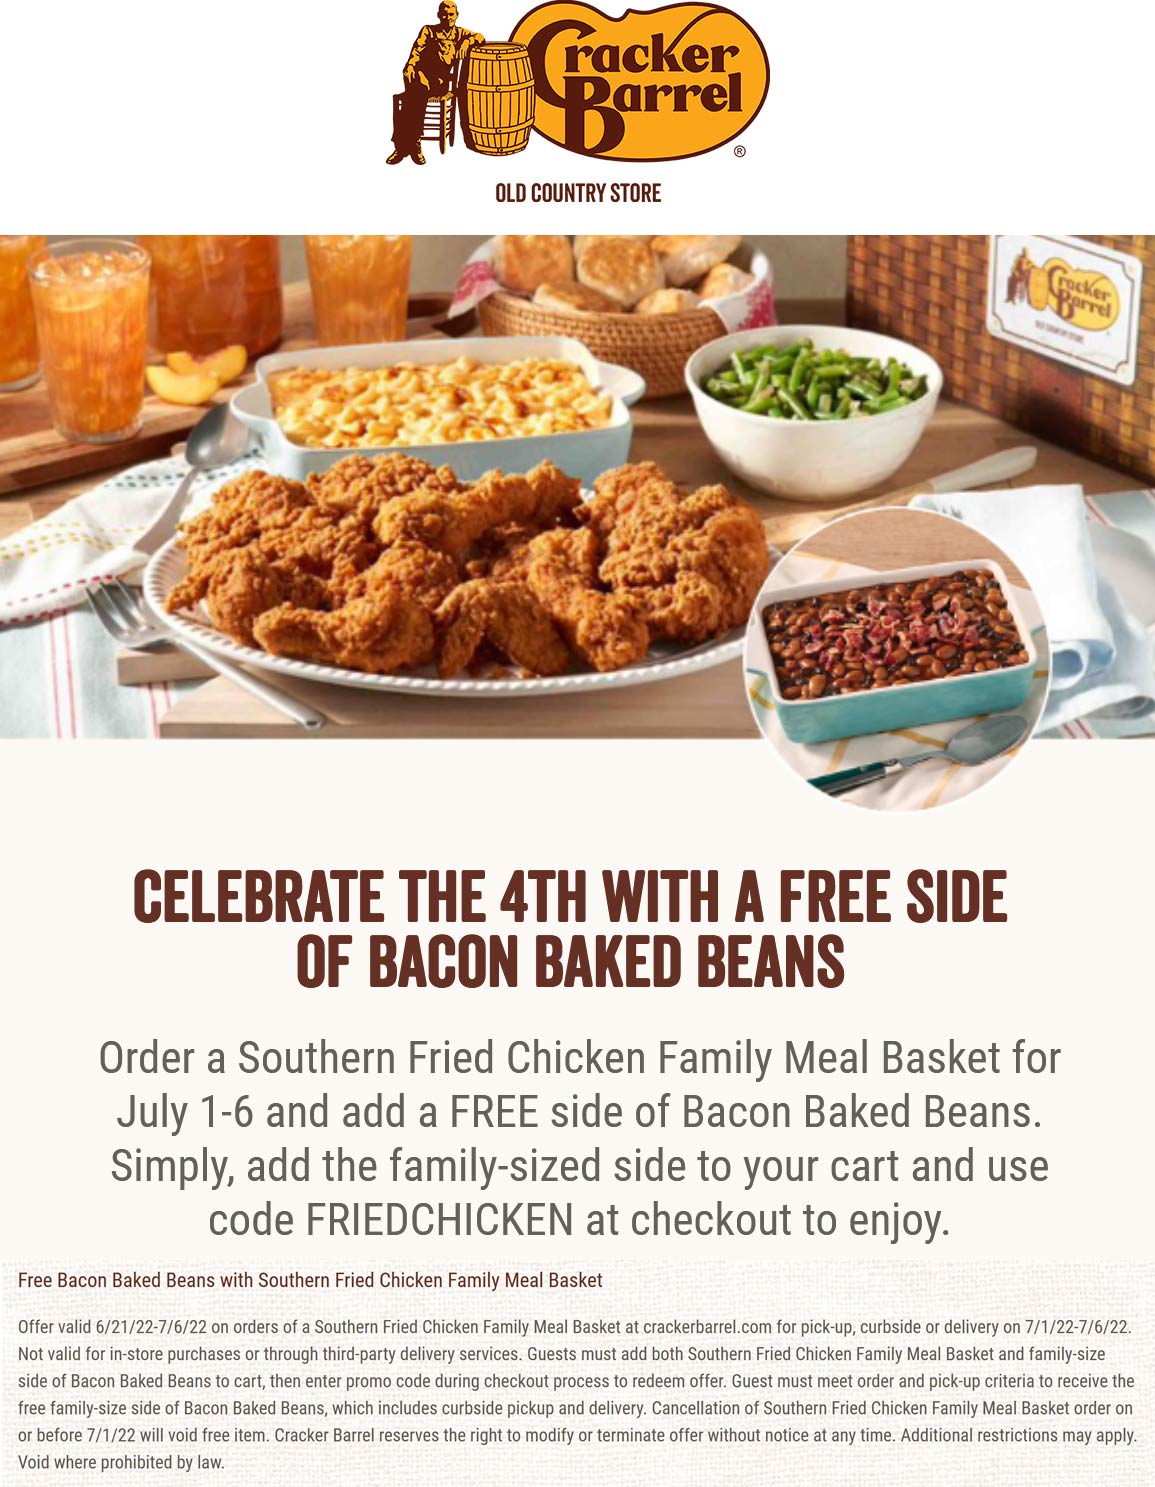 Cracker Barrel restaurants Coupon  Free bacon baked beans with southern fried chicken family meal basket at Cracker Barrel via promo code FRIEDCHICKEN #crackerbarrel 